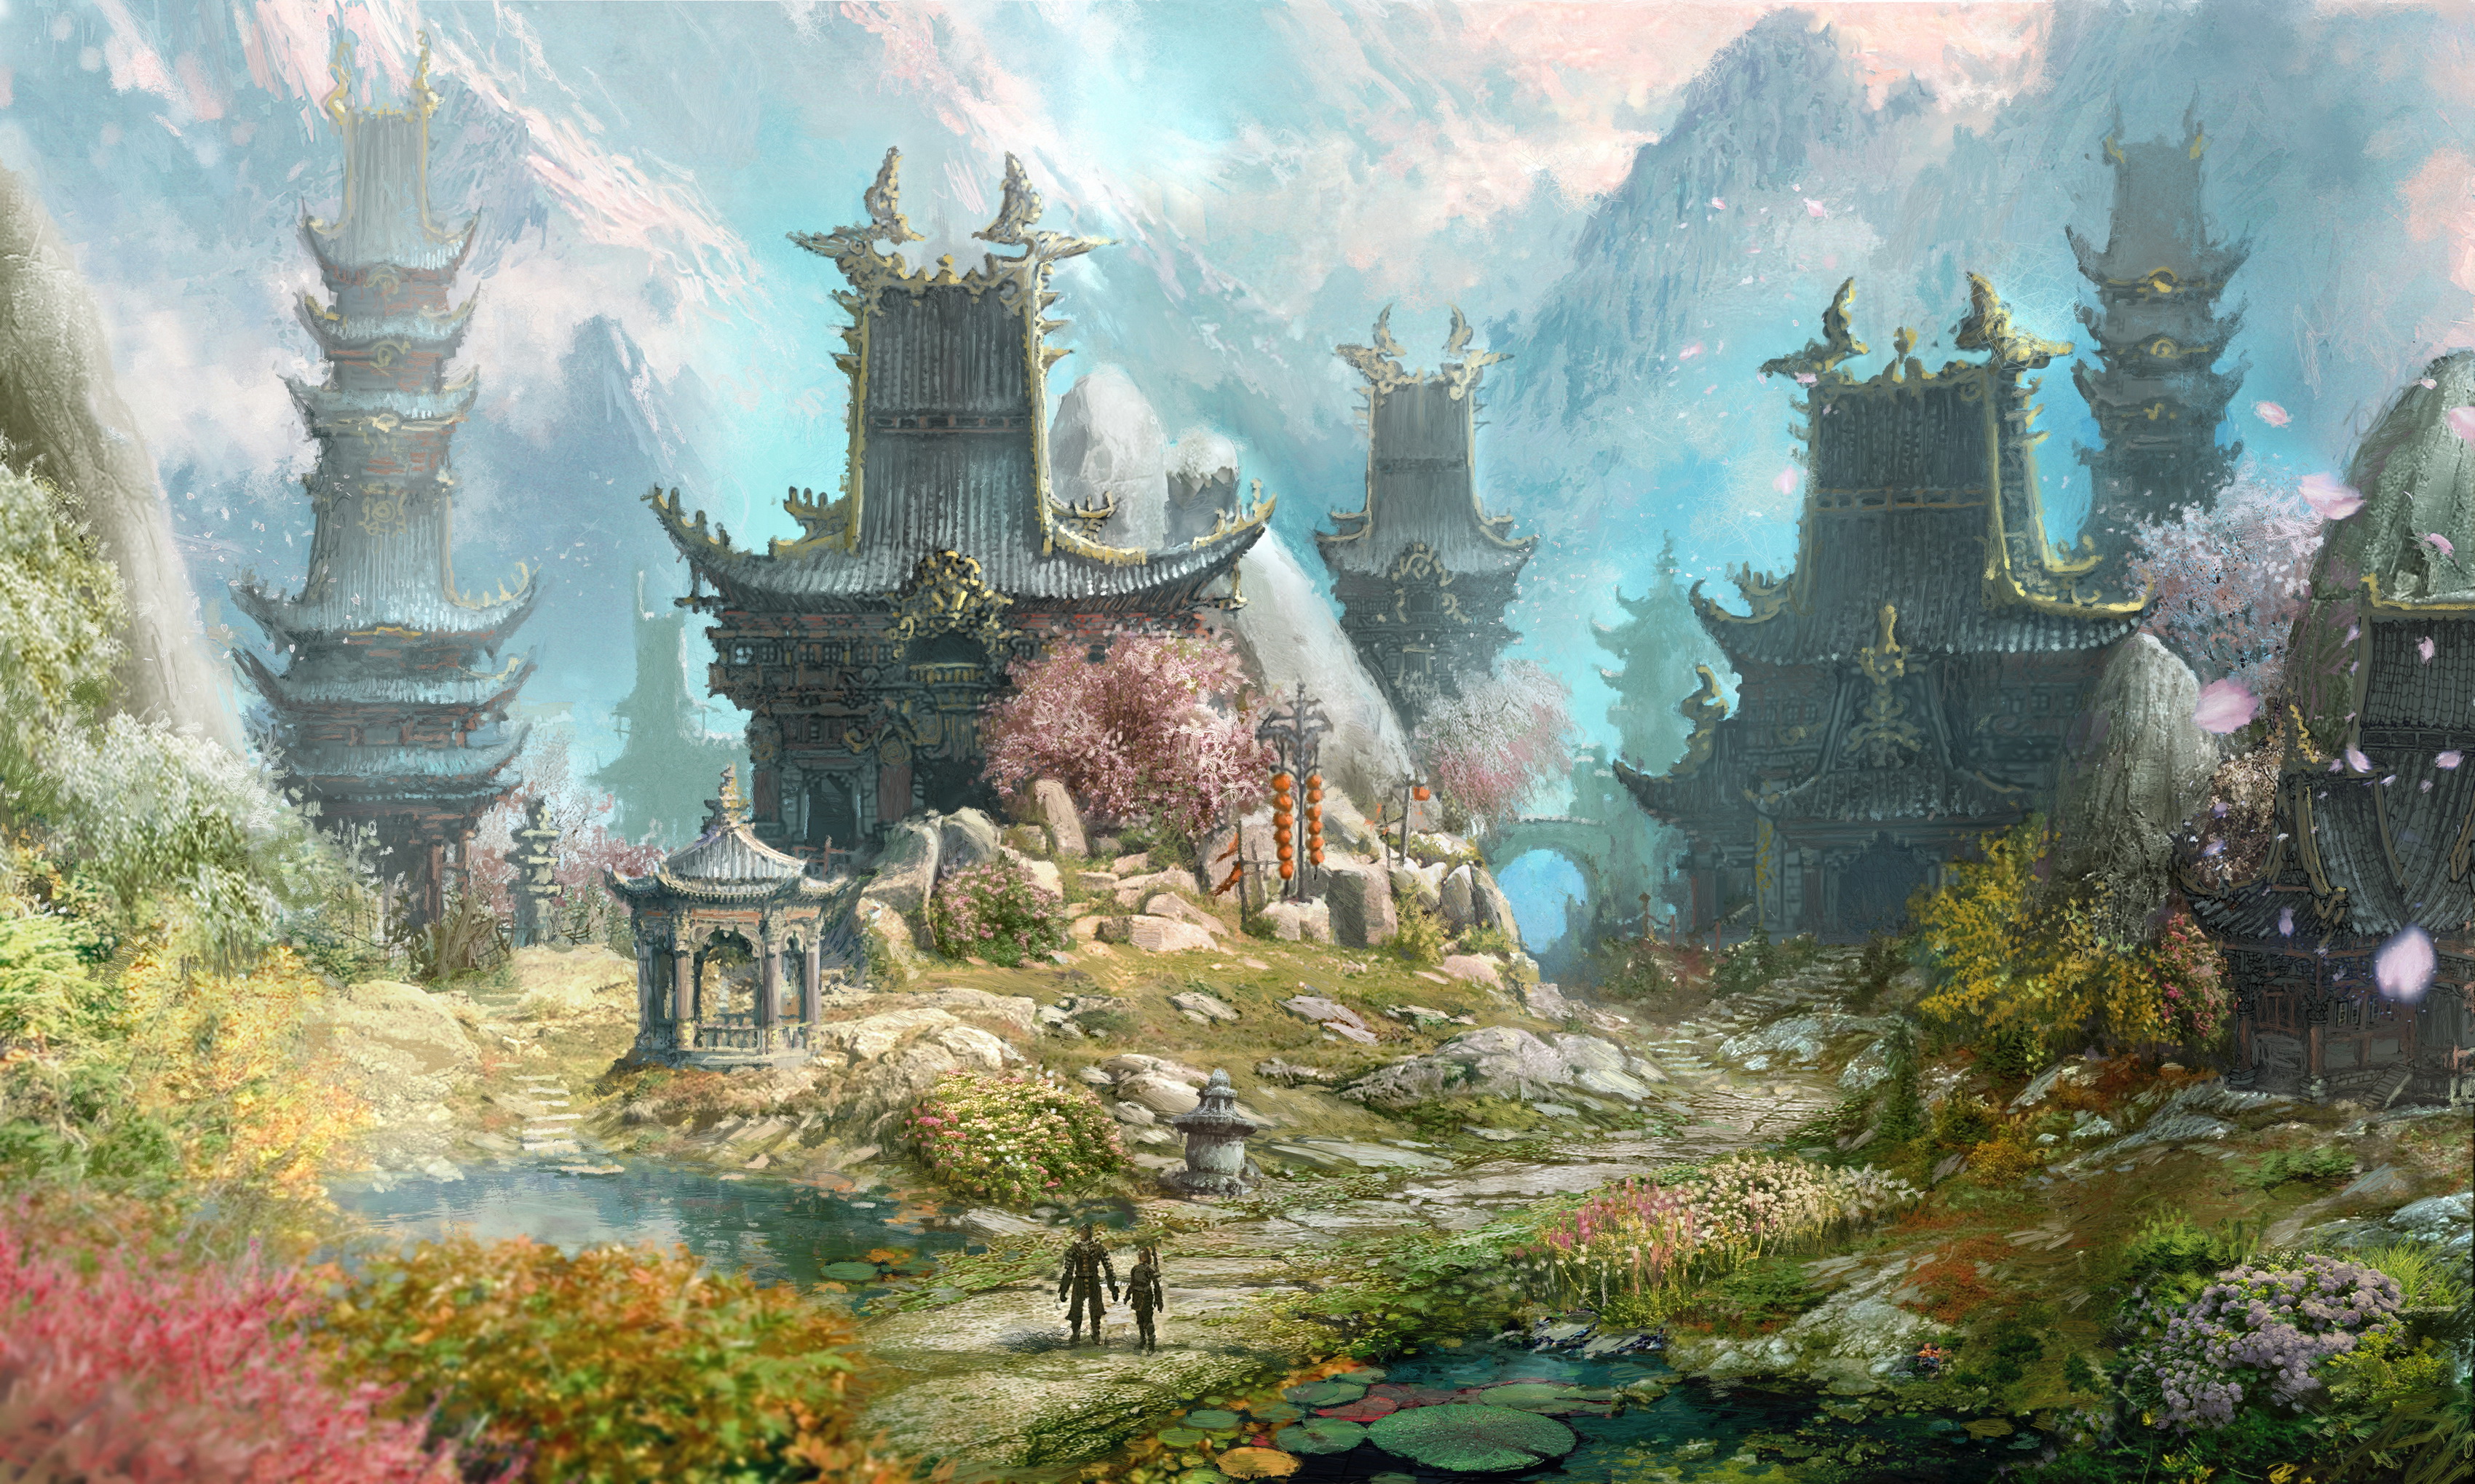 Video Game Blade & Soul HD Wallpaper | Background Image